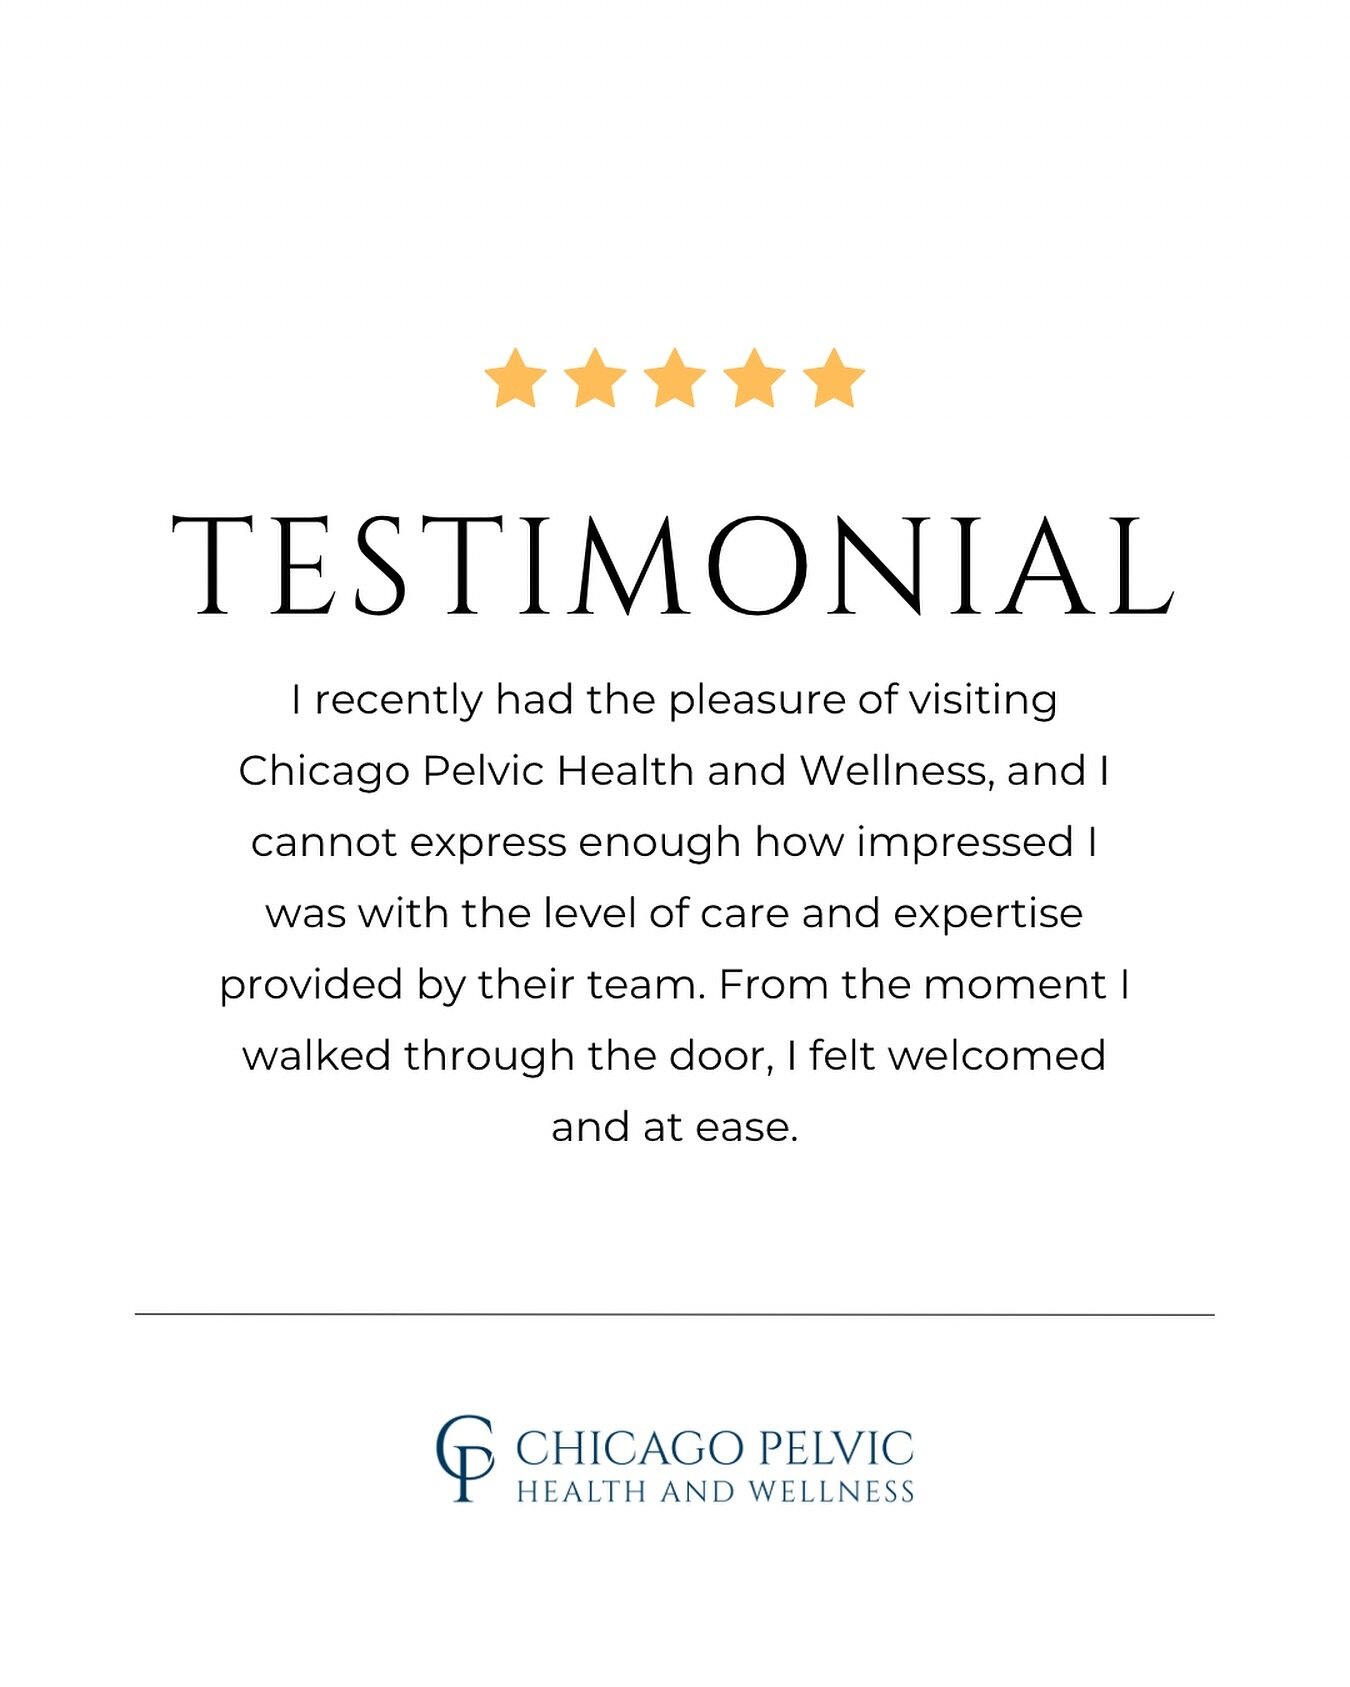 💕Testimonial Tuesday

At Chicago Pelvic we strive to deliver the highest level care at each and every visit. 

Not only do we want you to leave with all your questions answered, we want you to leave with relief that you have finally found the right 